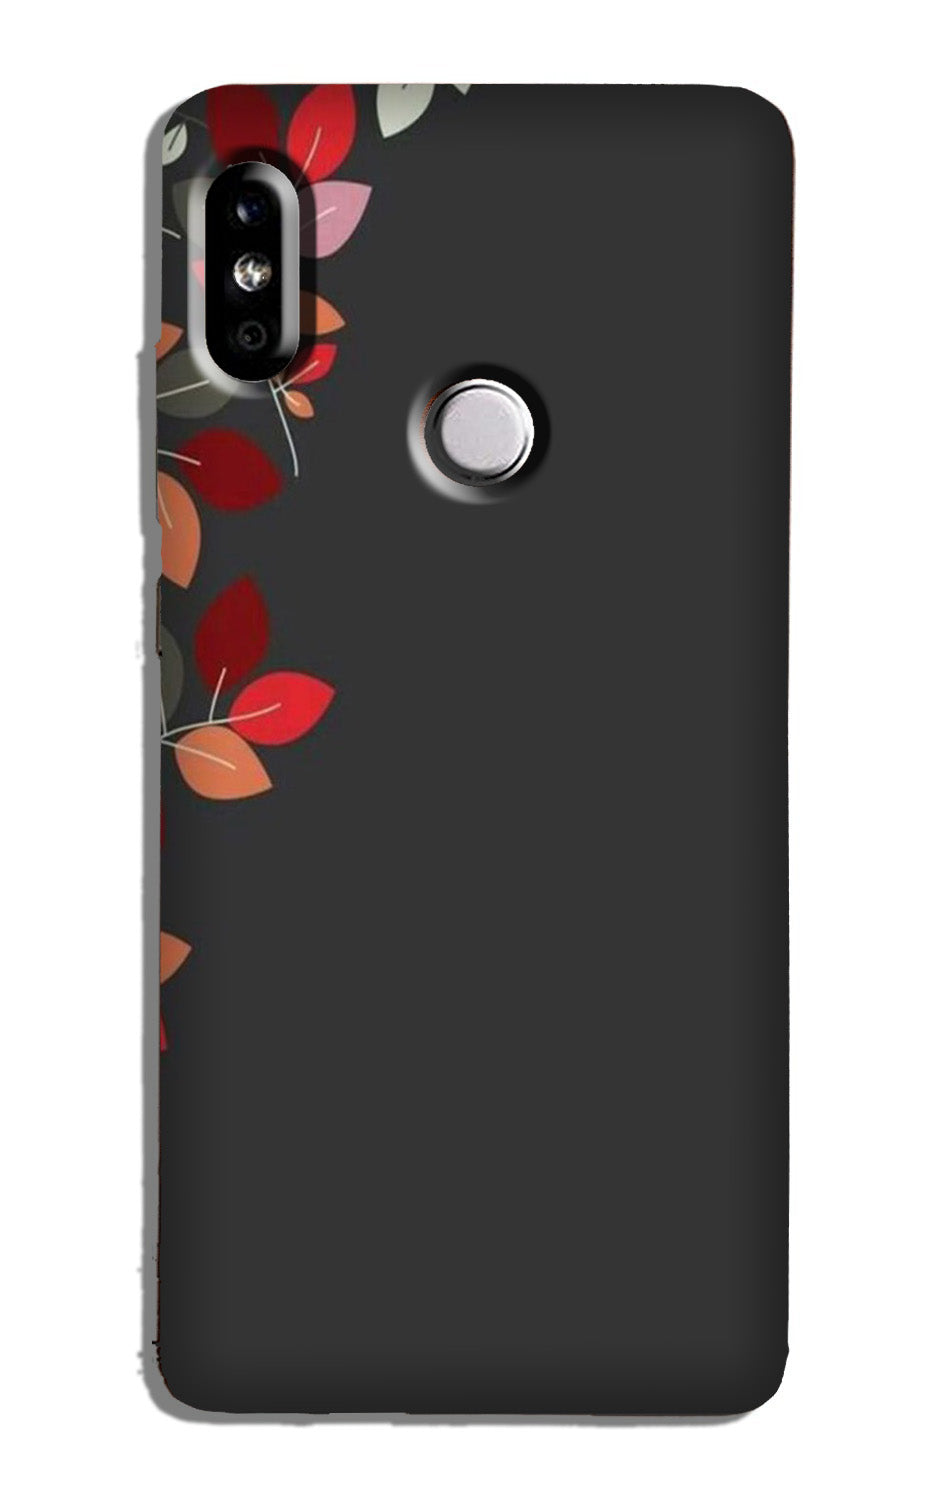 Grey Background Case for Redmi Note 6 Pro